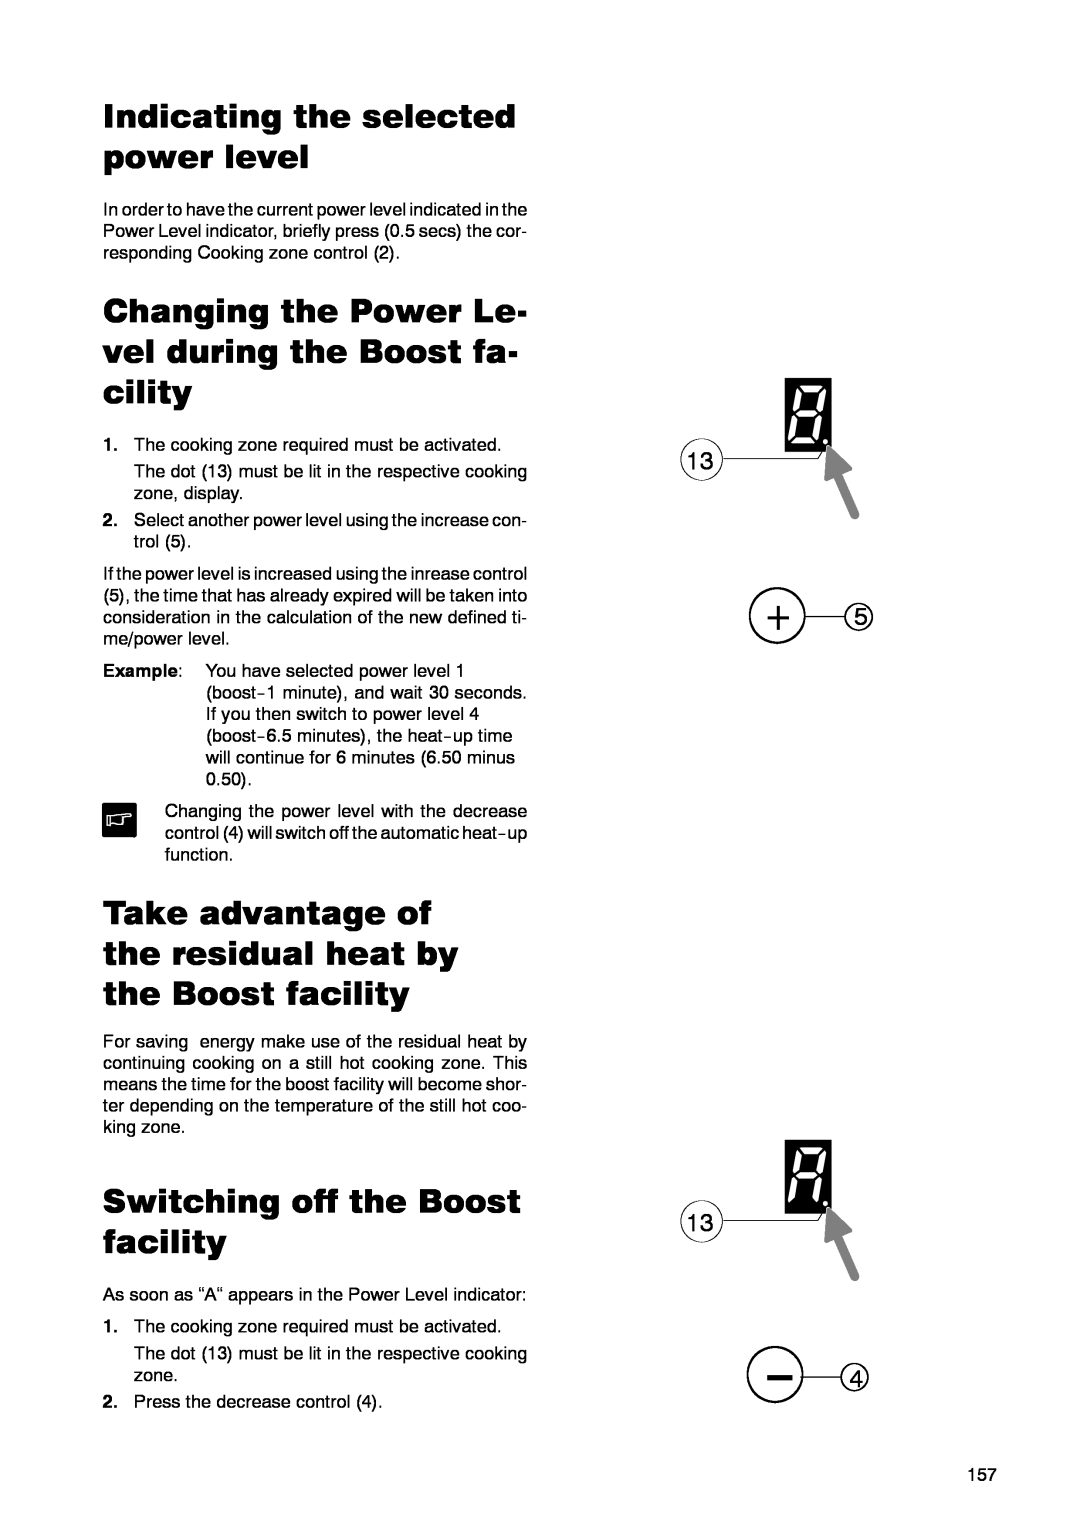 Zanussi ZKT 662 LN operating instructions Indicating the selected power level, Switching off the Boost facility 